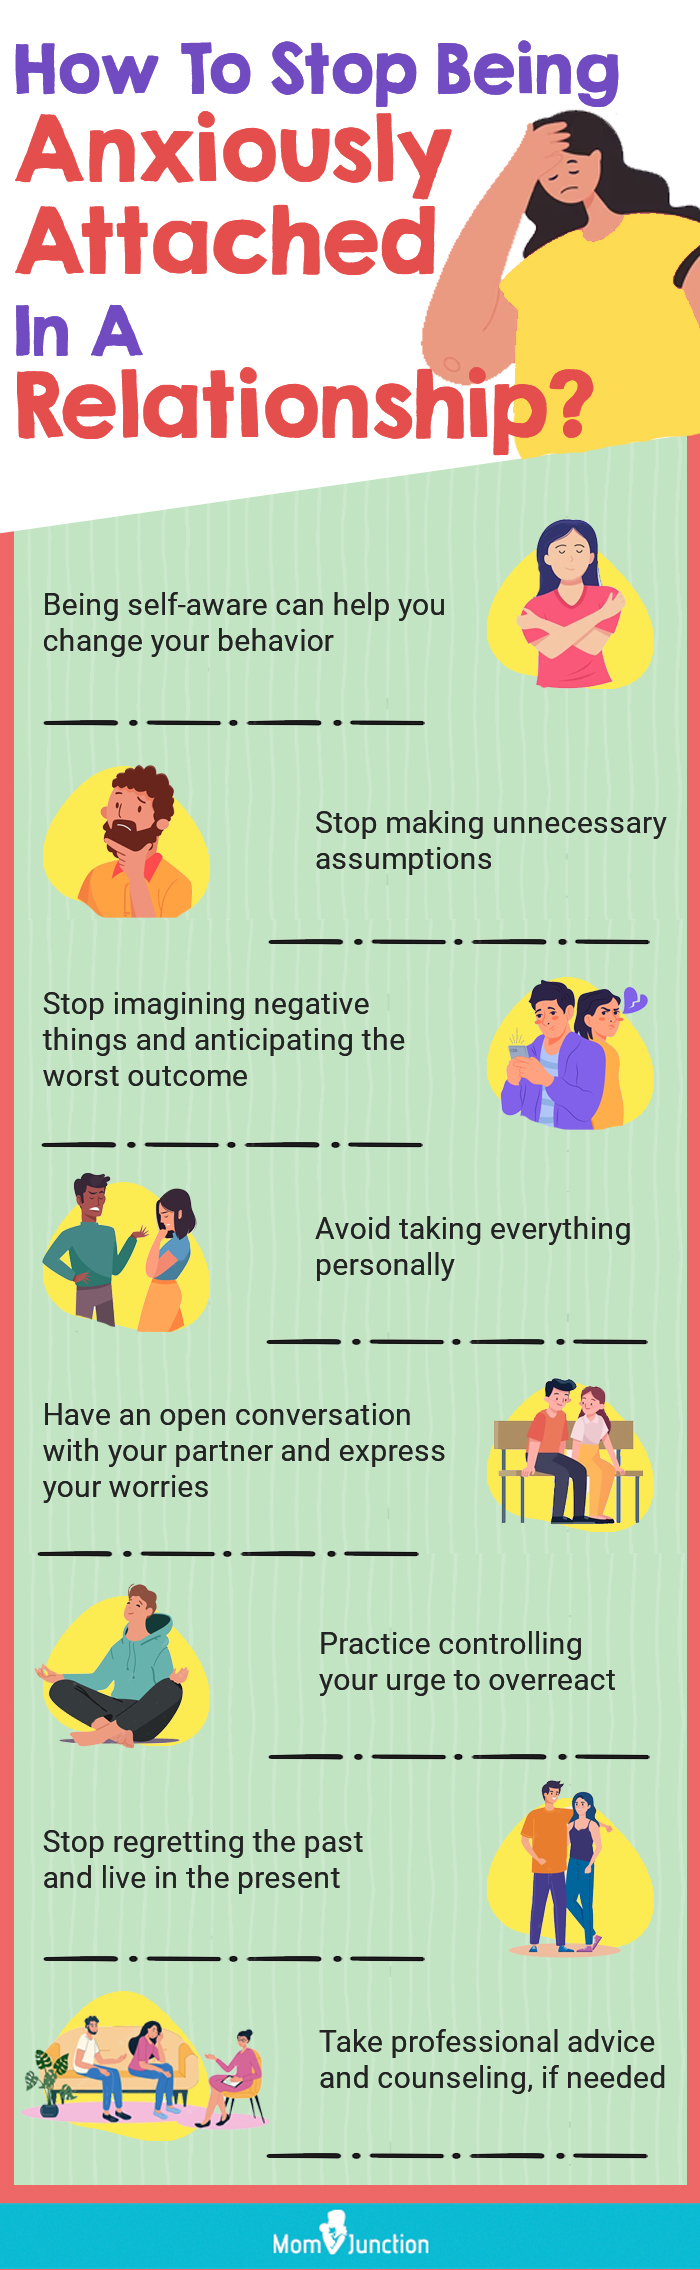 how to stop being anxiously attached in a relationship (infographic)